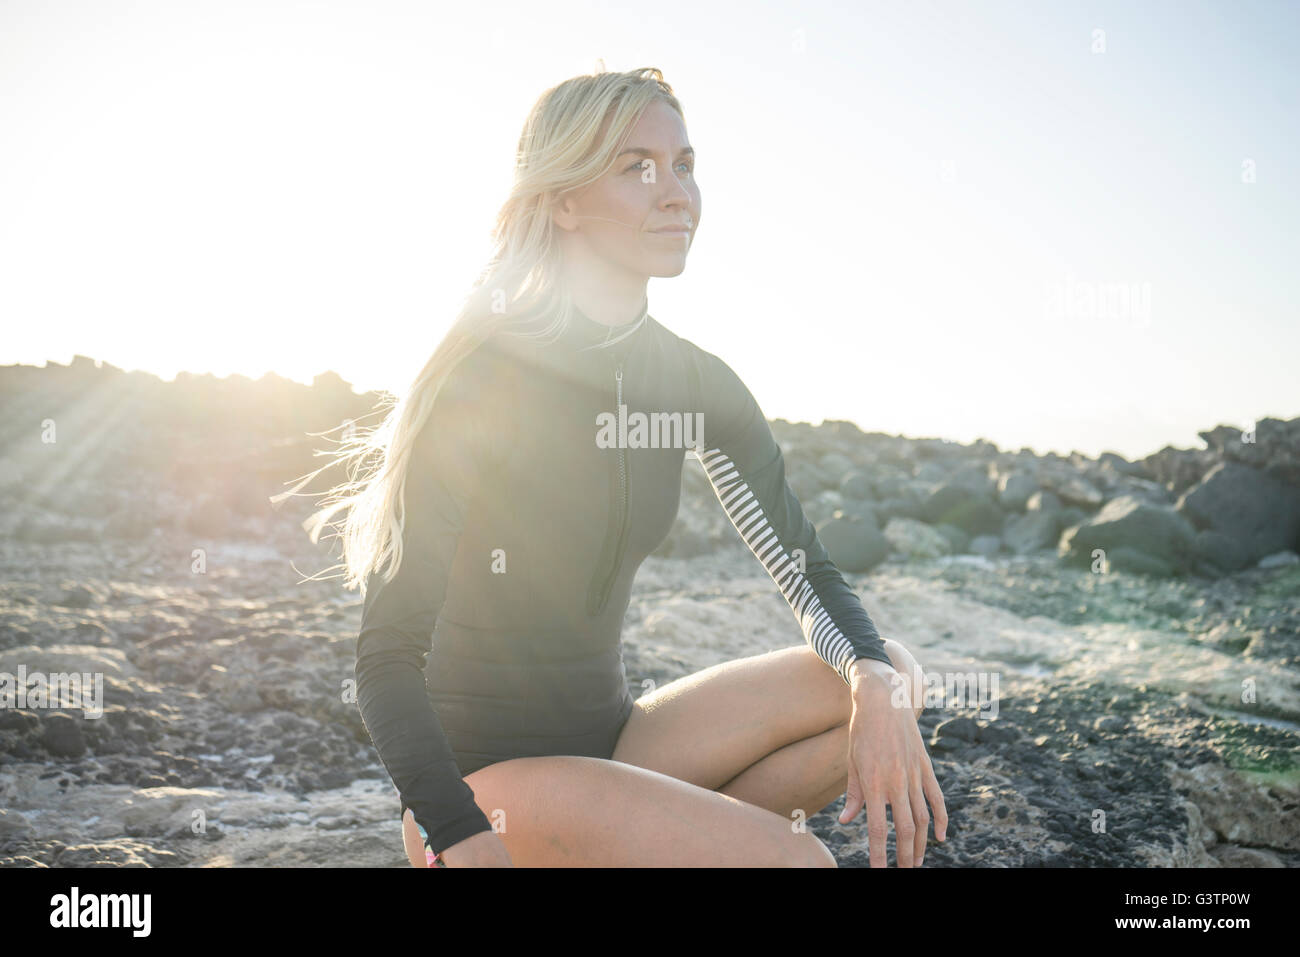 A woman in a wetsuit preparing to surf at Corralejo in Fuerteventura. Stock Photo